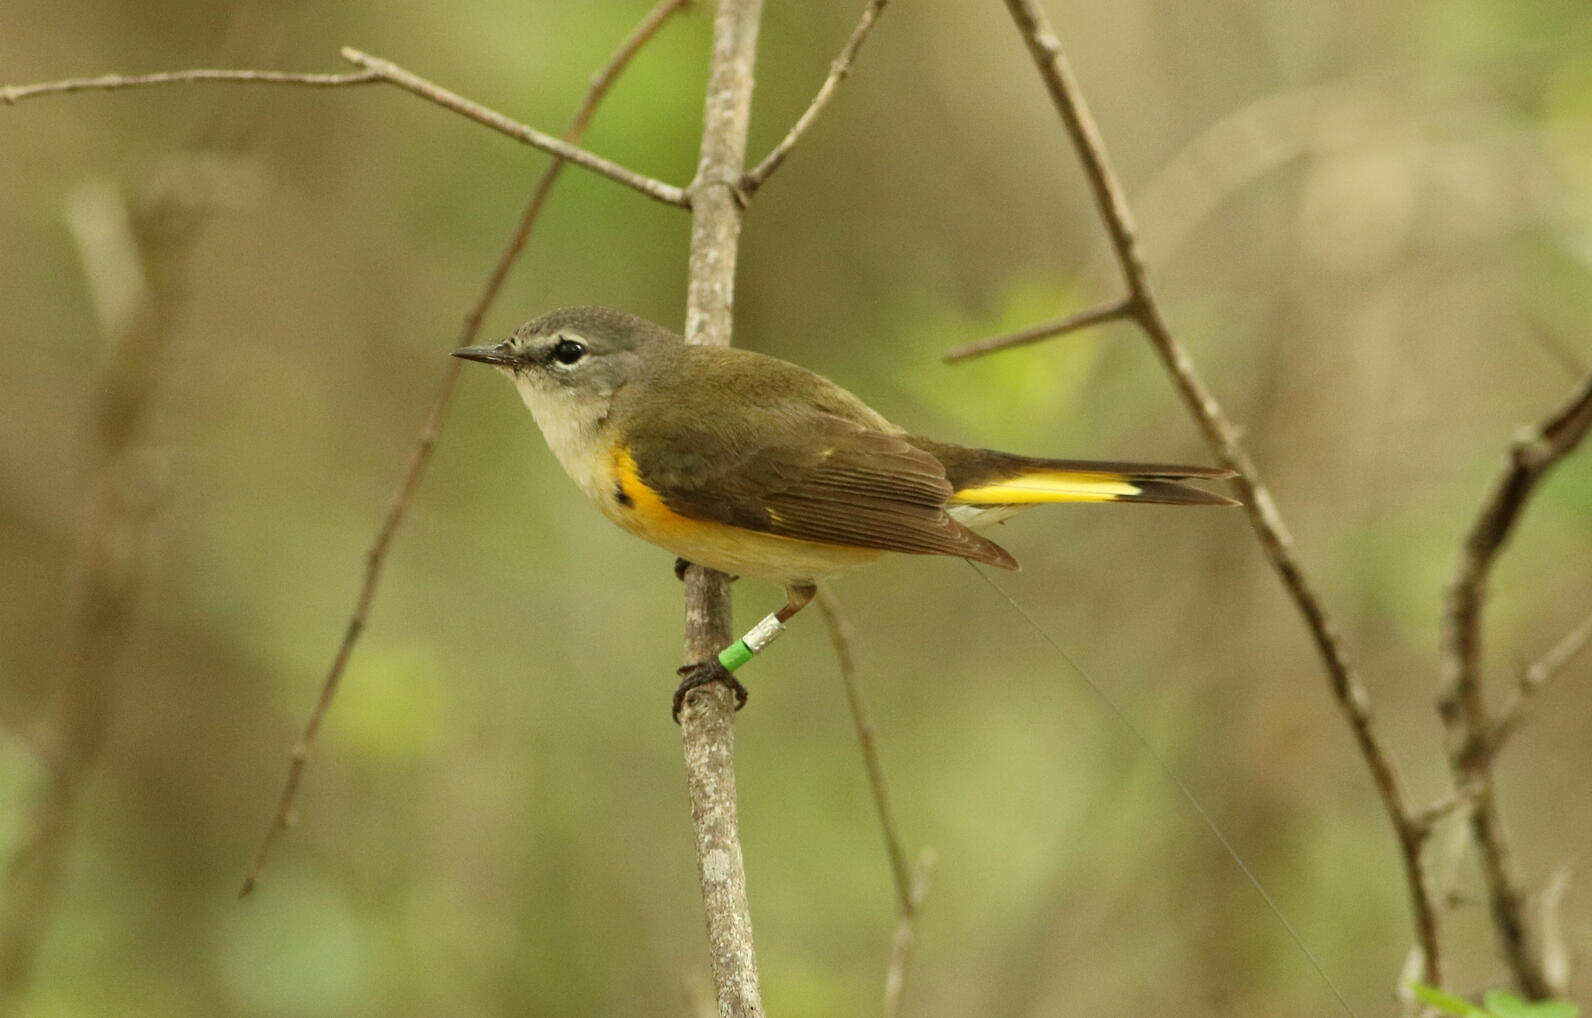 A small bird in a forest with a leg band.